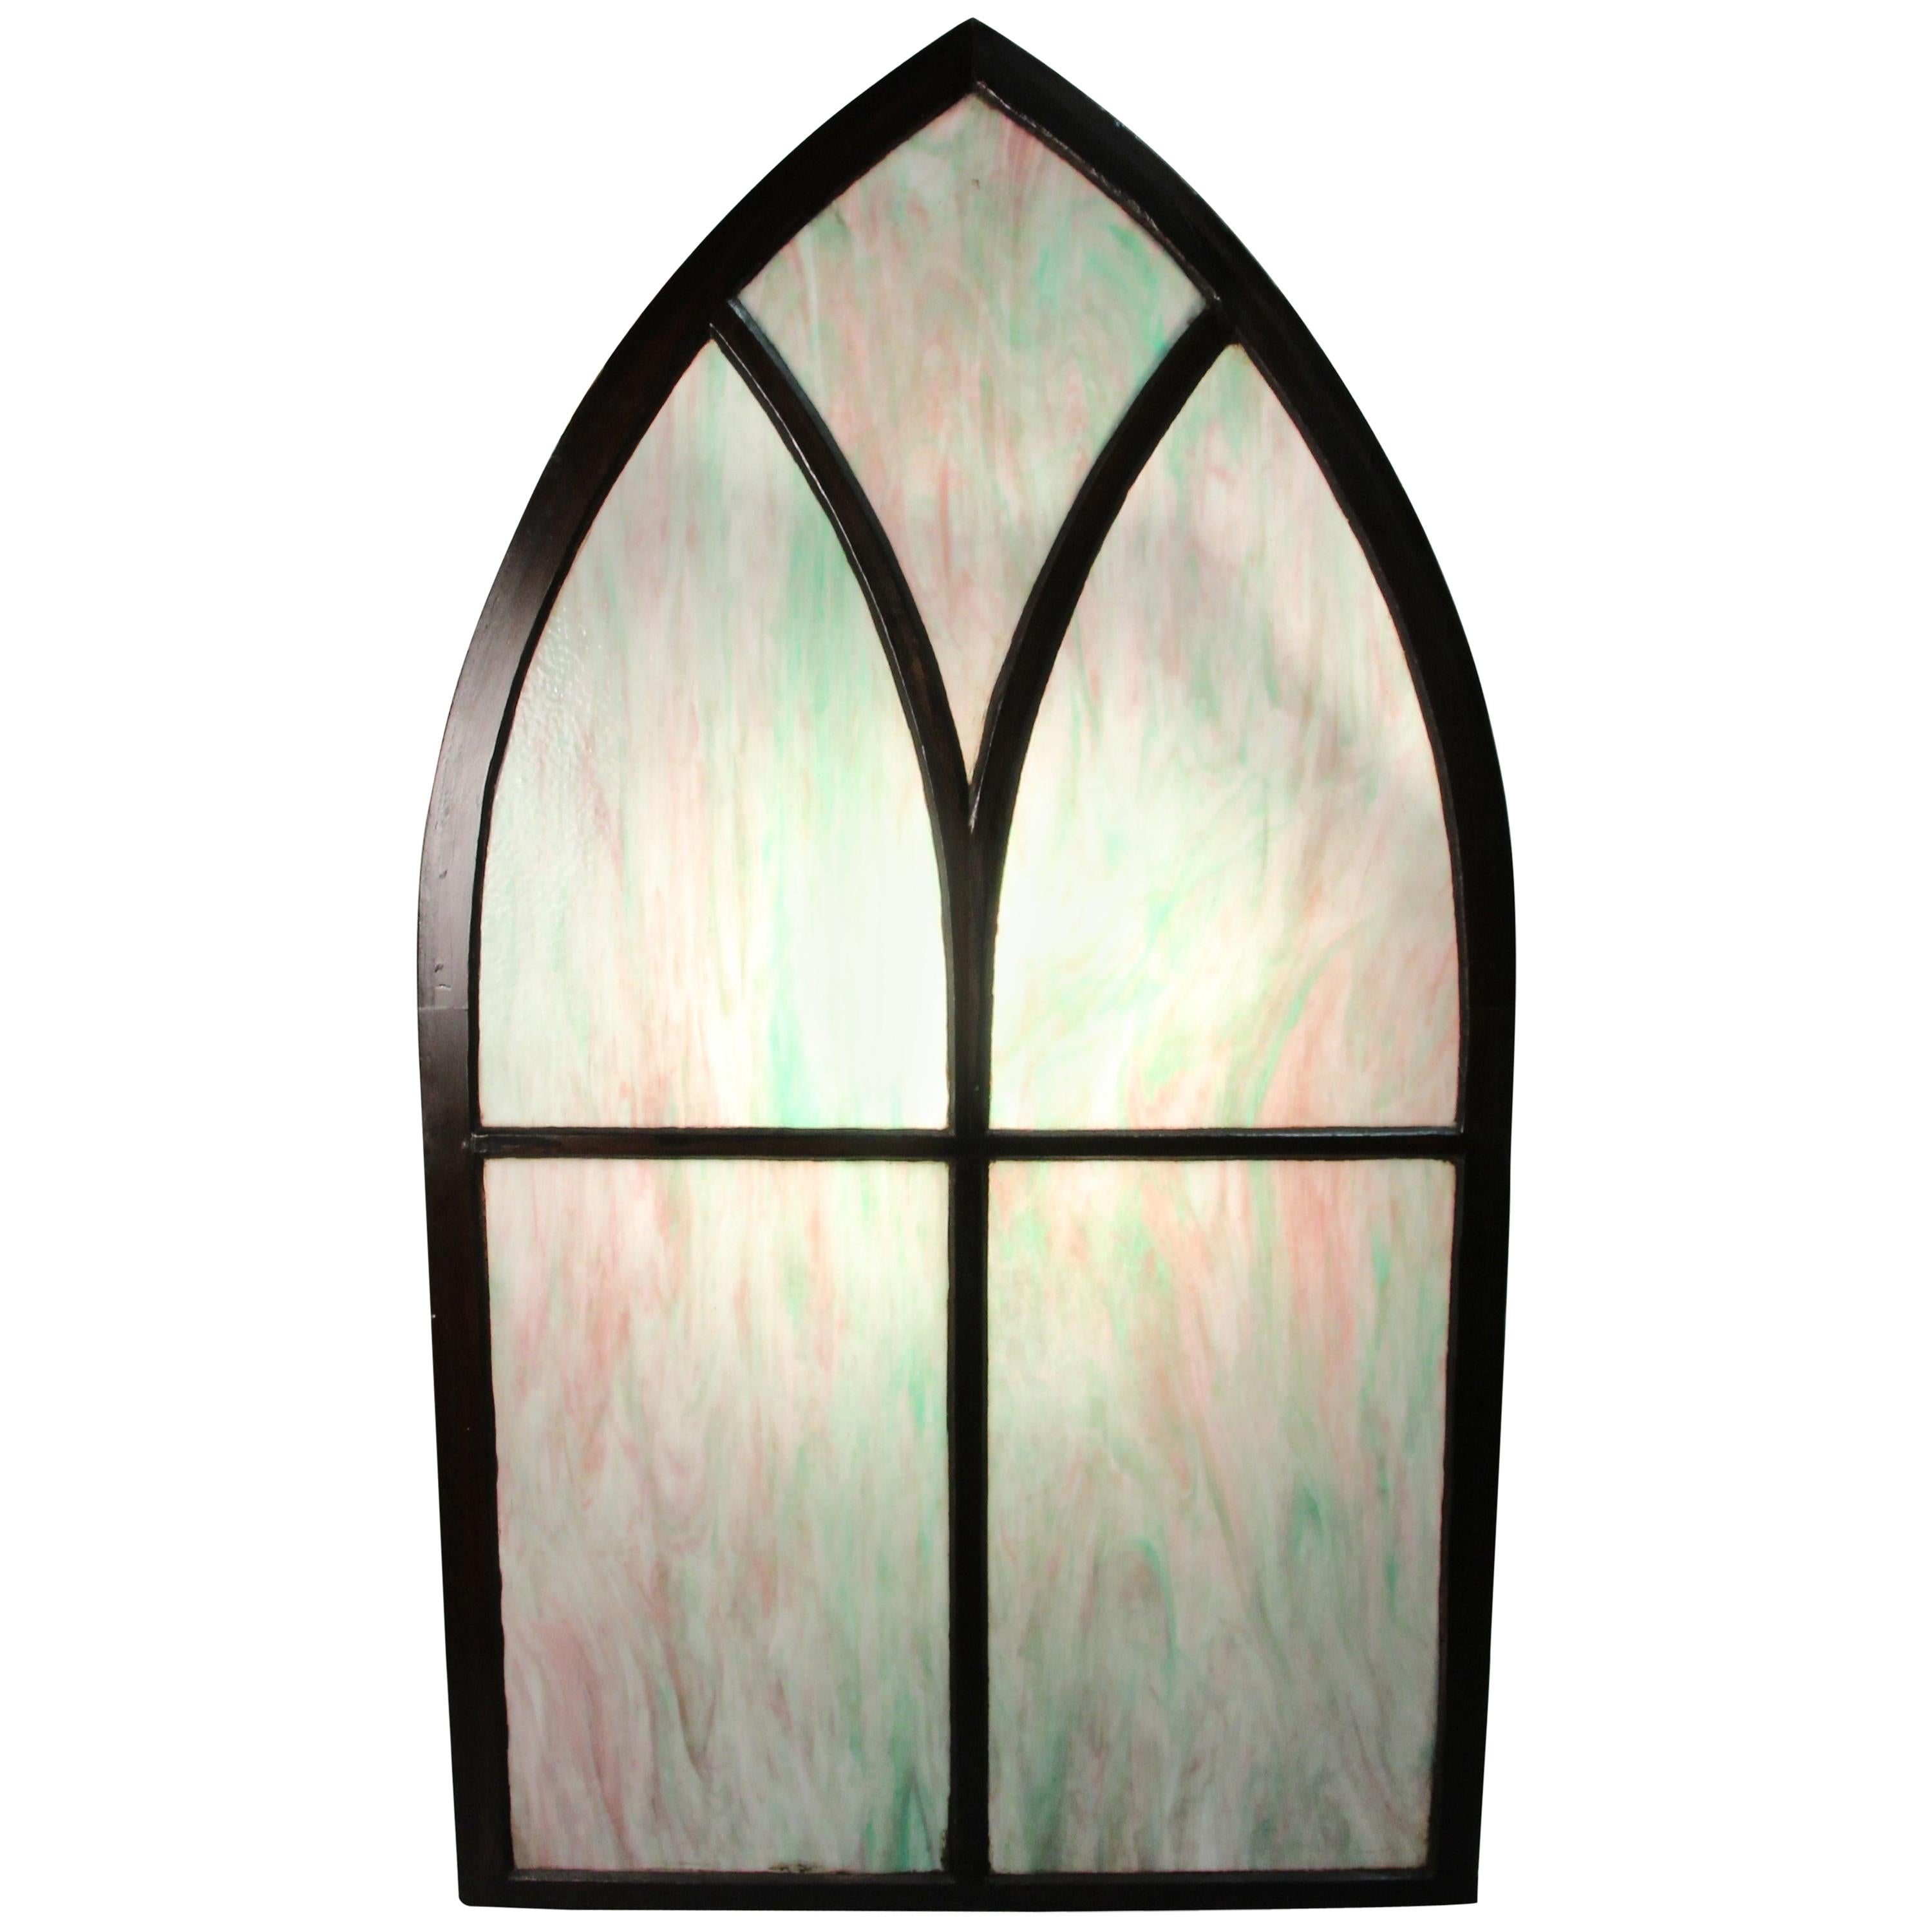 1 of 4 Turn of The Century Peaked Stained Glass Window For Sale